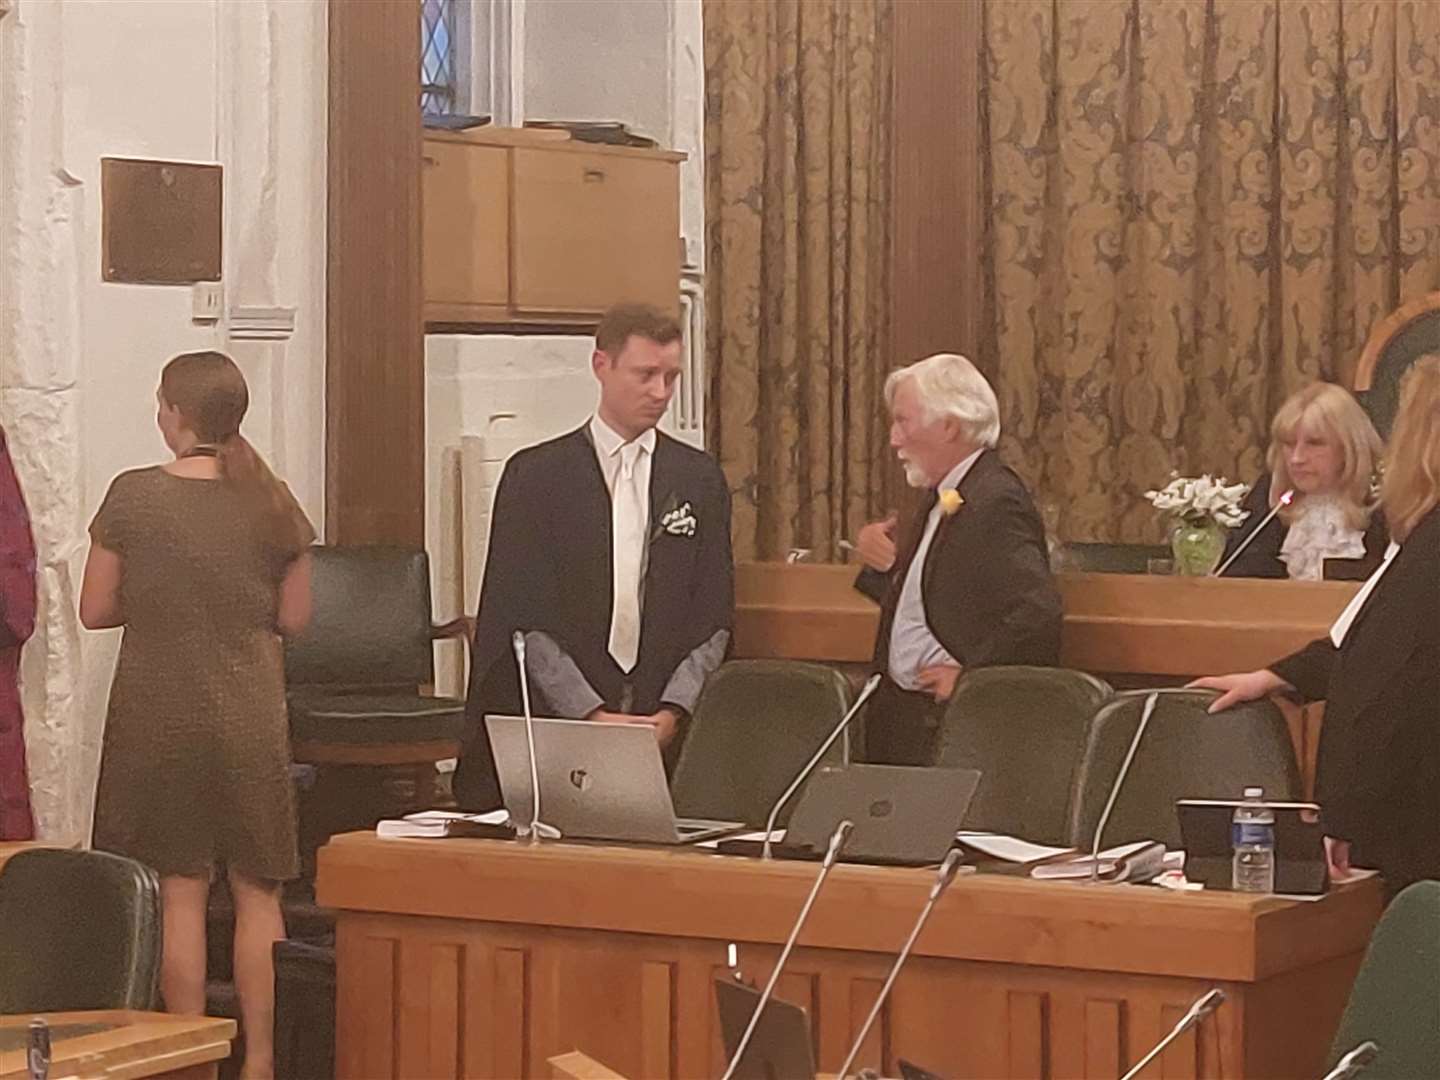 Cllrs Fitter-Harding and Dixey were seen exchanging a quiet word while votes for the next Lord Mayor were cast